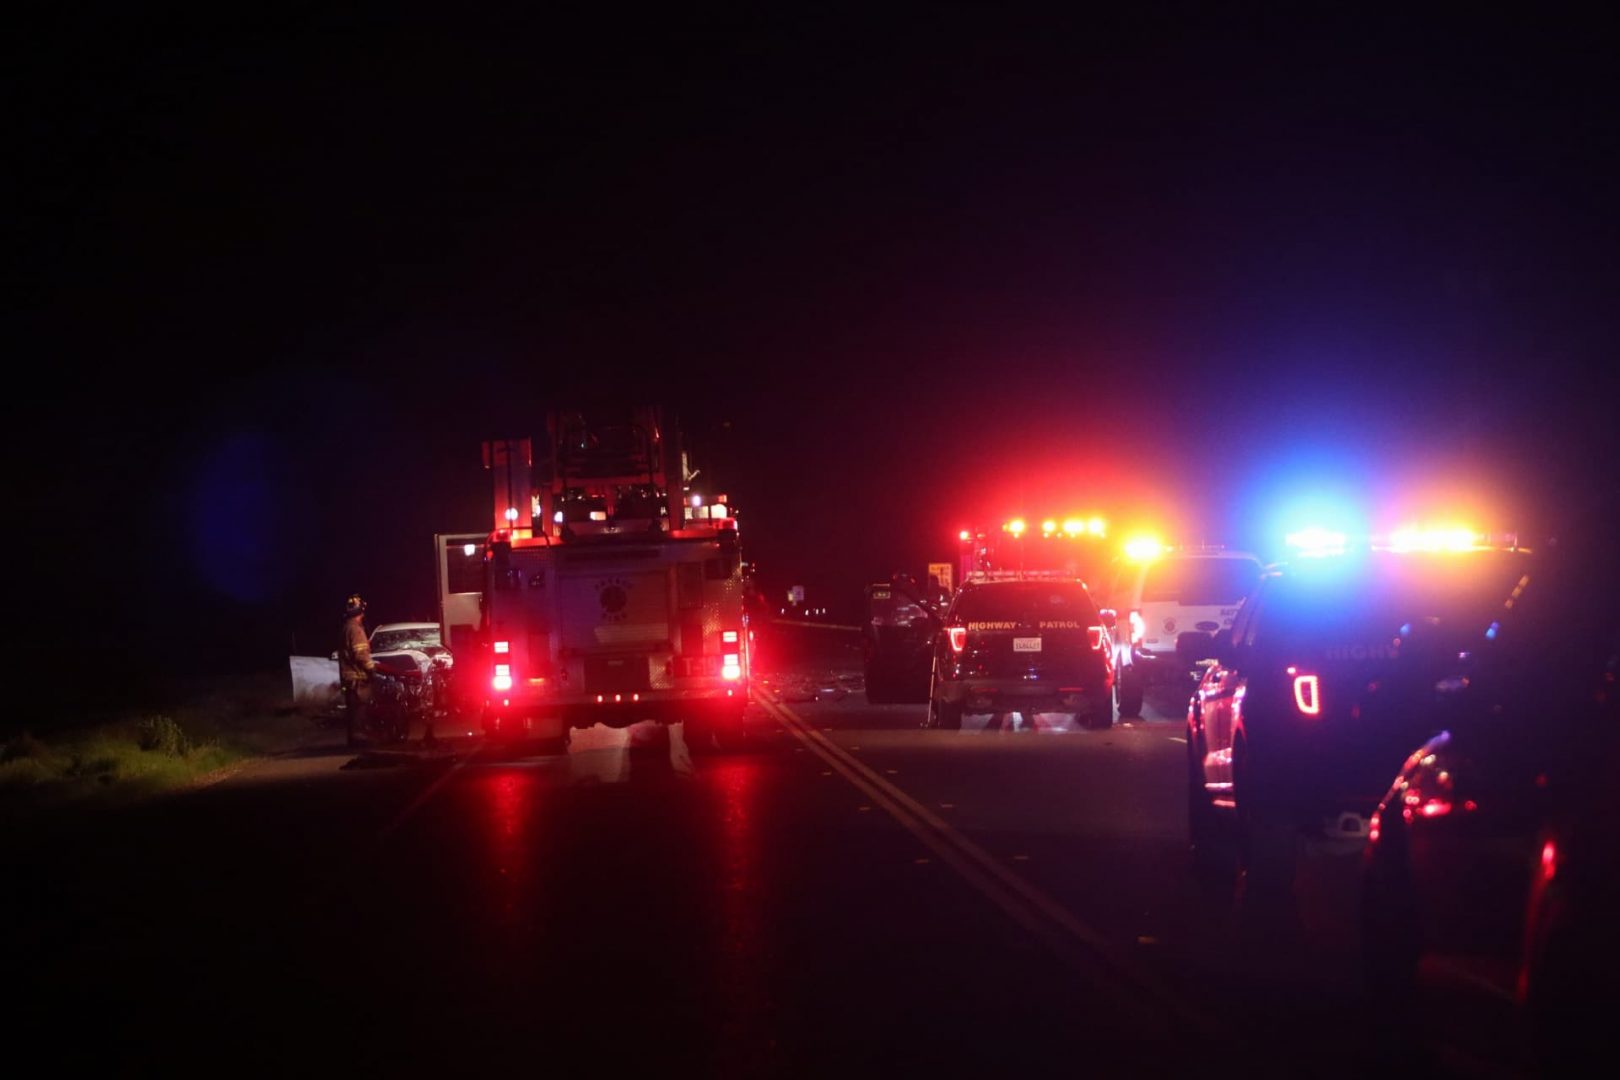 A 23-year-old Kerman man was driving a 2018 Mercedes east in the westbound lanes of Highway 180 near Hayes Avenue around 11 p.m. Monday, March 4, 2019 when he collided head-on with a 22-year-old Firebaugh woman who was westbound in a 2015 Honda. Both drivers died at the scene.
(Larry Valenzuela/The Collegian)